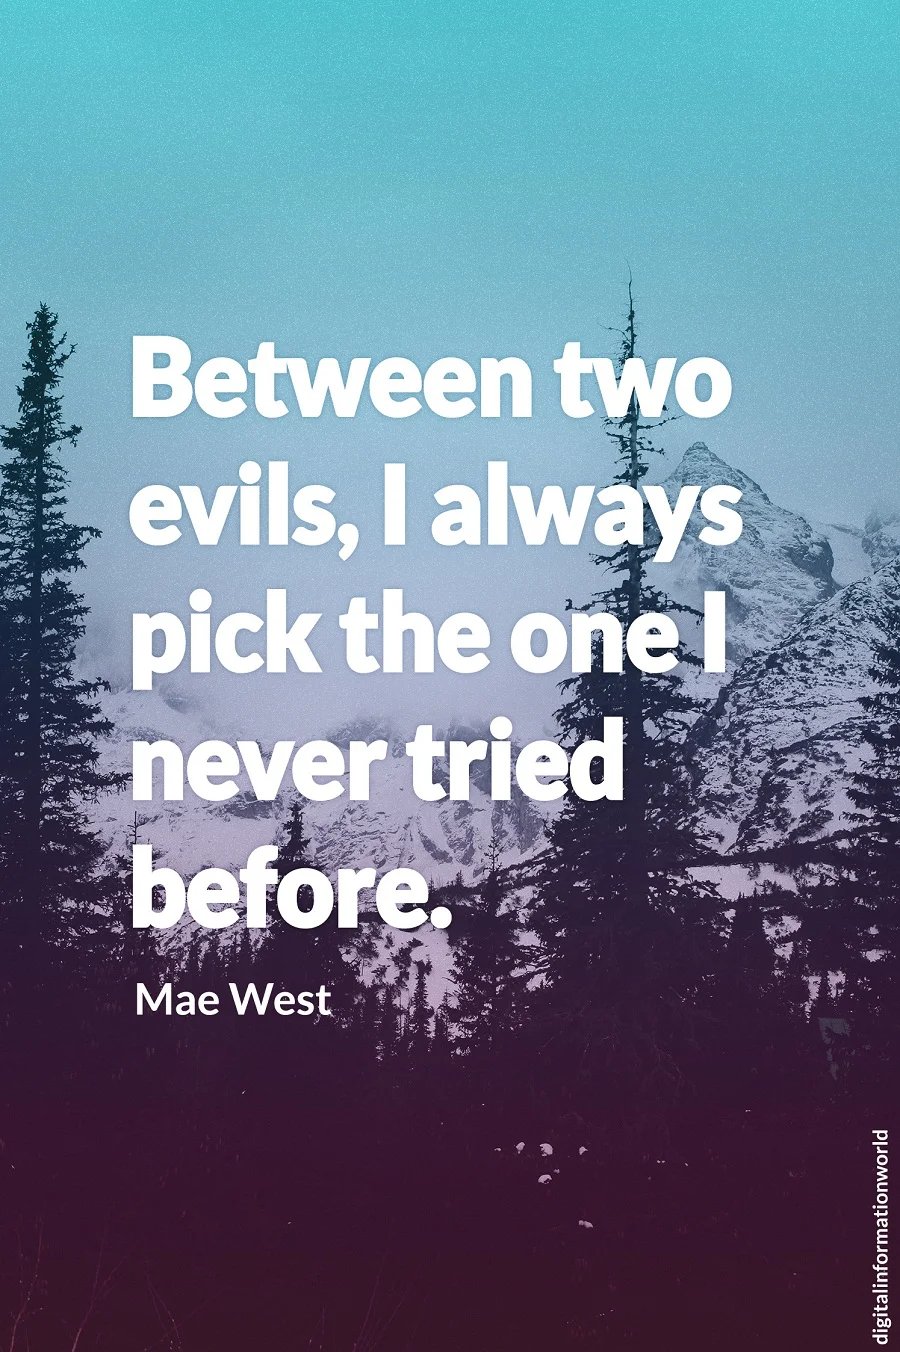 Between two evils I always pick the one I never tried before. Mae West